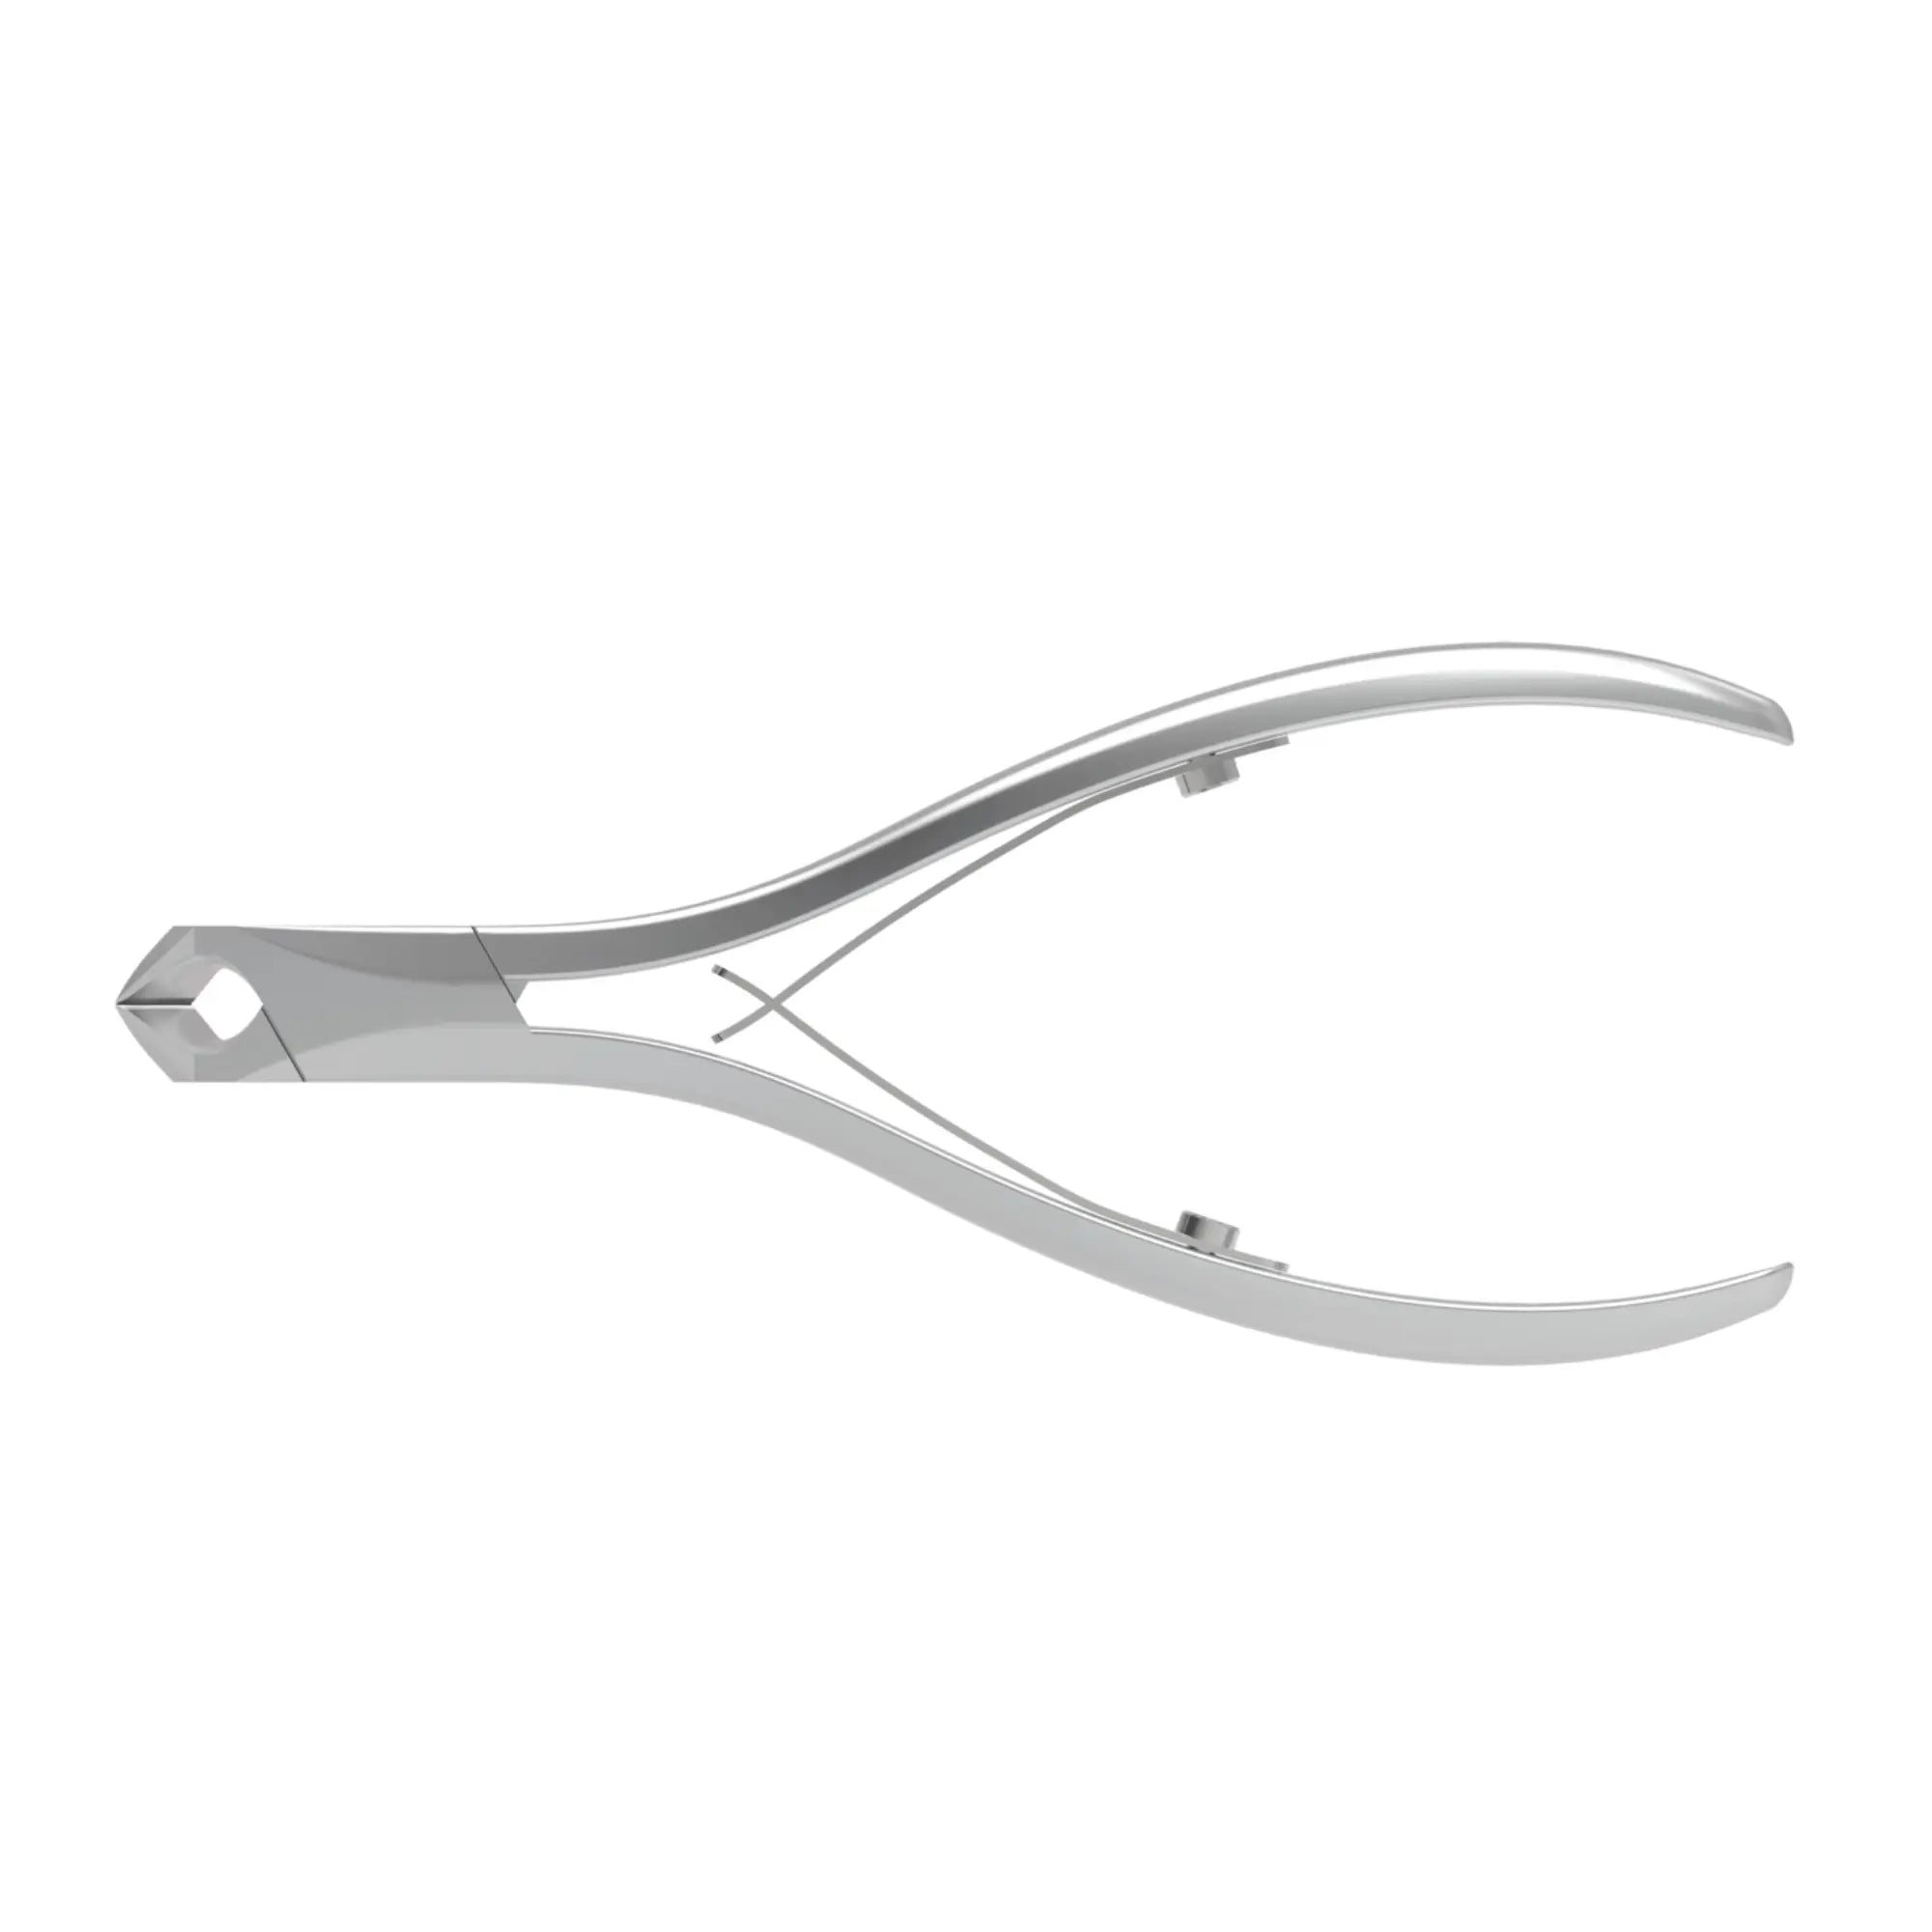 Pince à ongles - Coupe concave 15 mm - 11 cm - Ruck Ruck